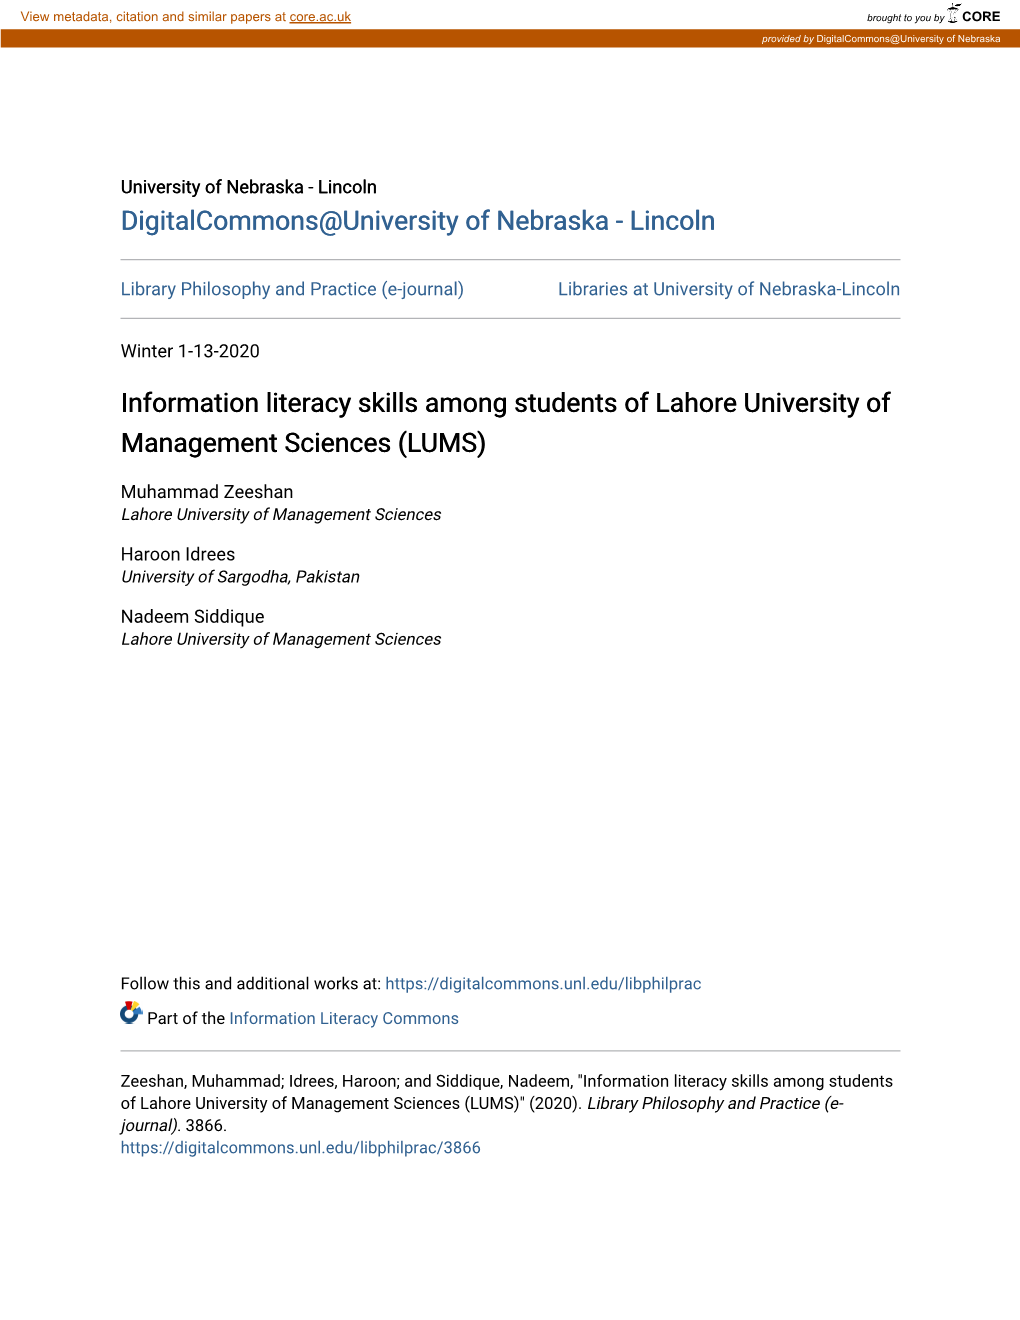 Information Literacy Skills Among Students of Lahore University of Management Sciences (LUMS)